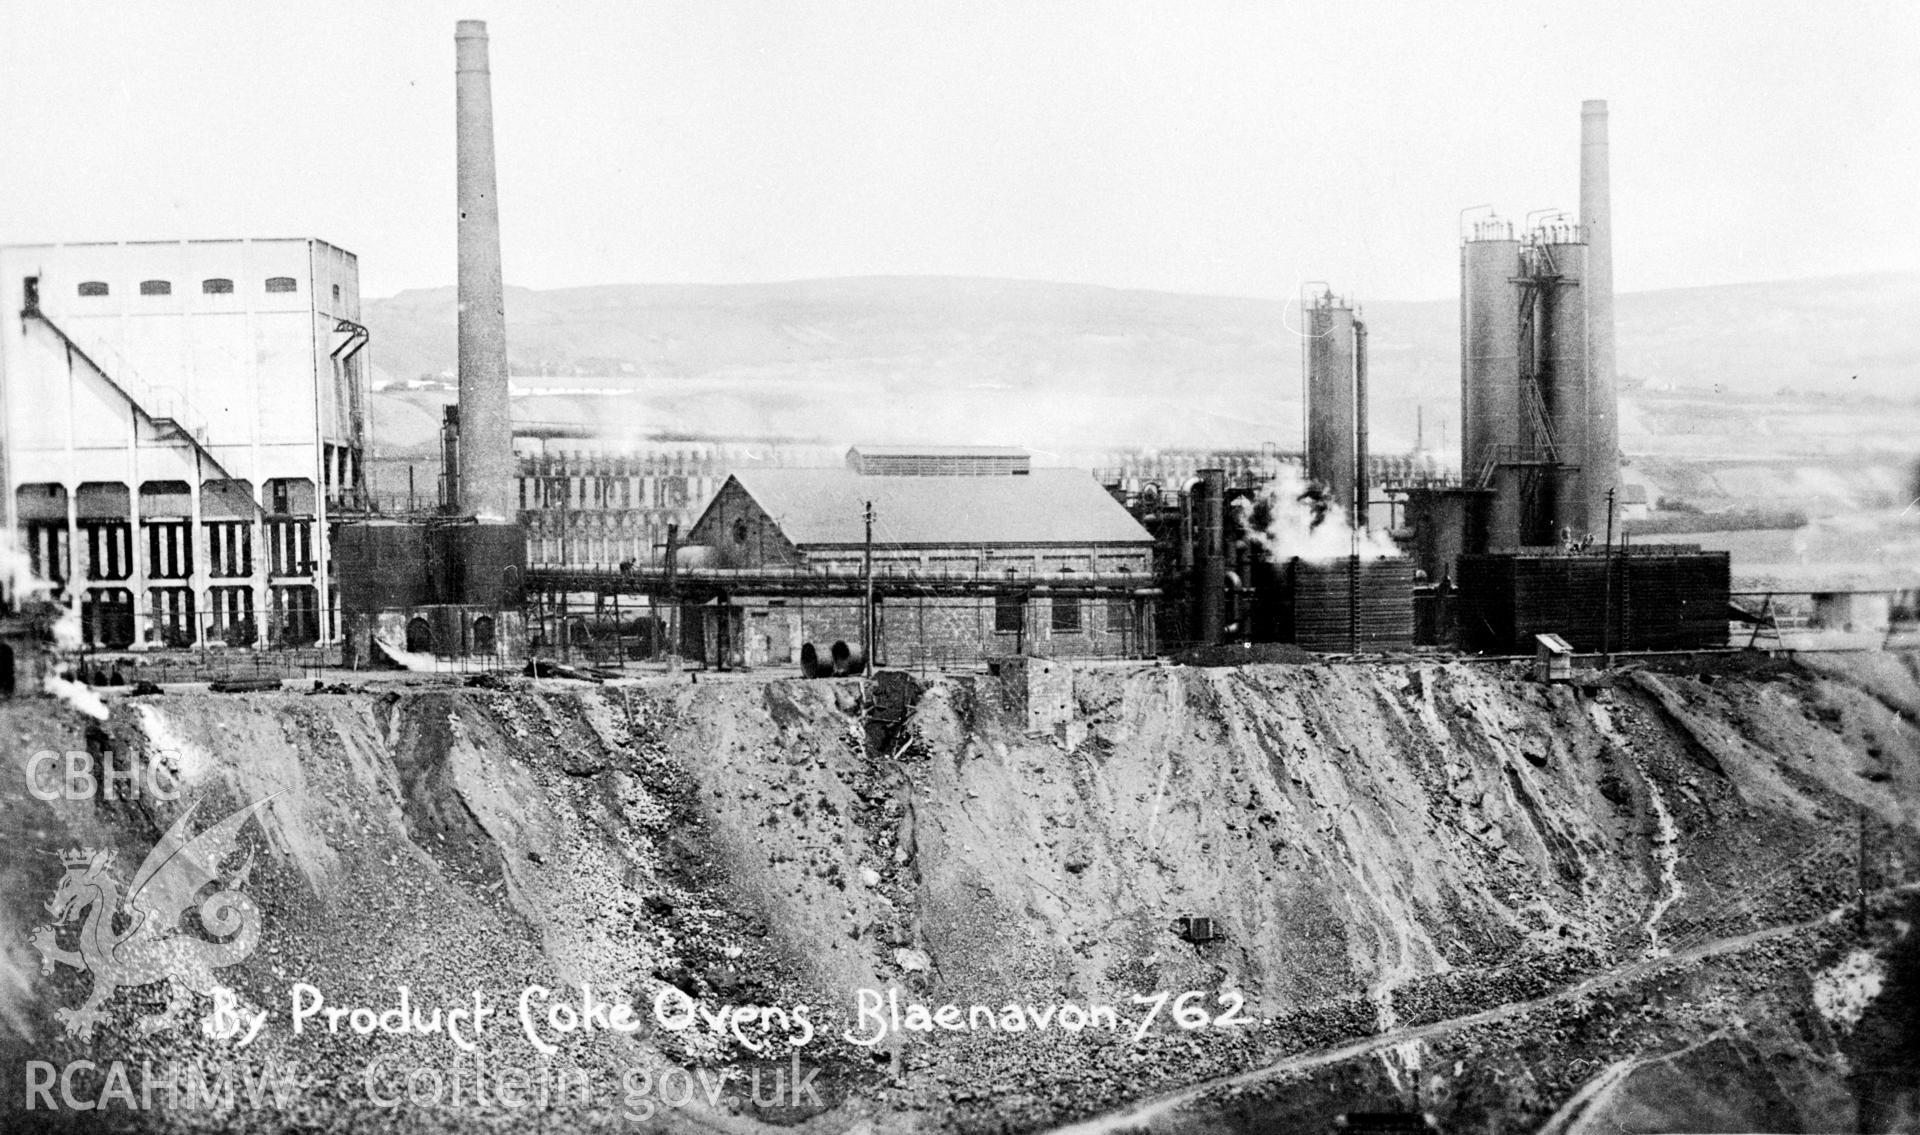 Blaenavon coke ovens from south (Cornwell ref:2099). NA/MM/91/121e